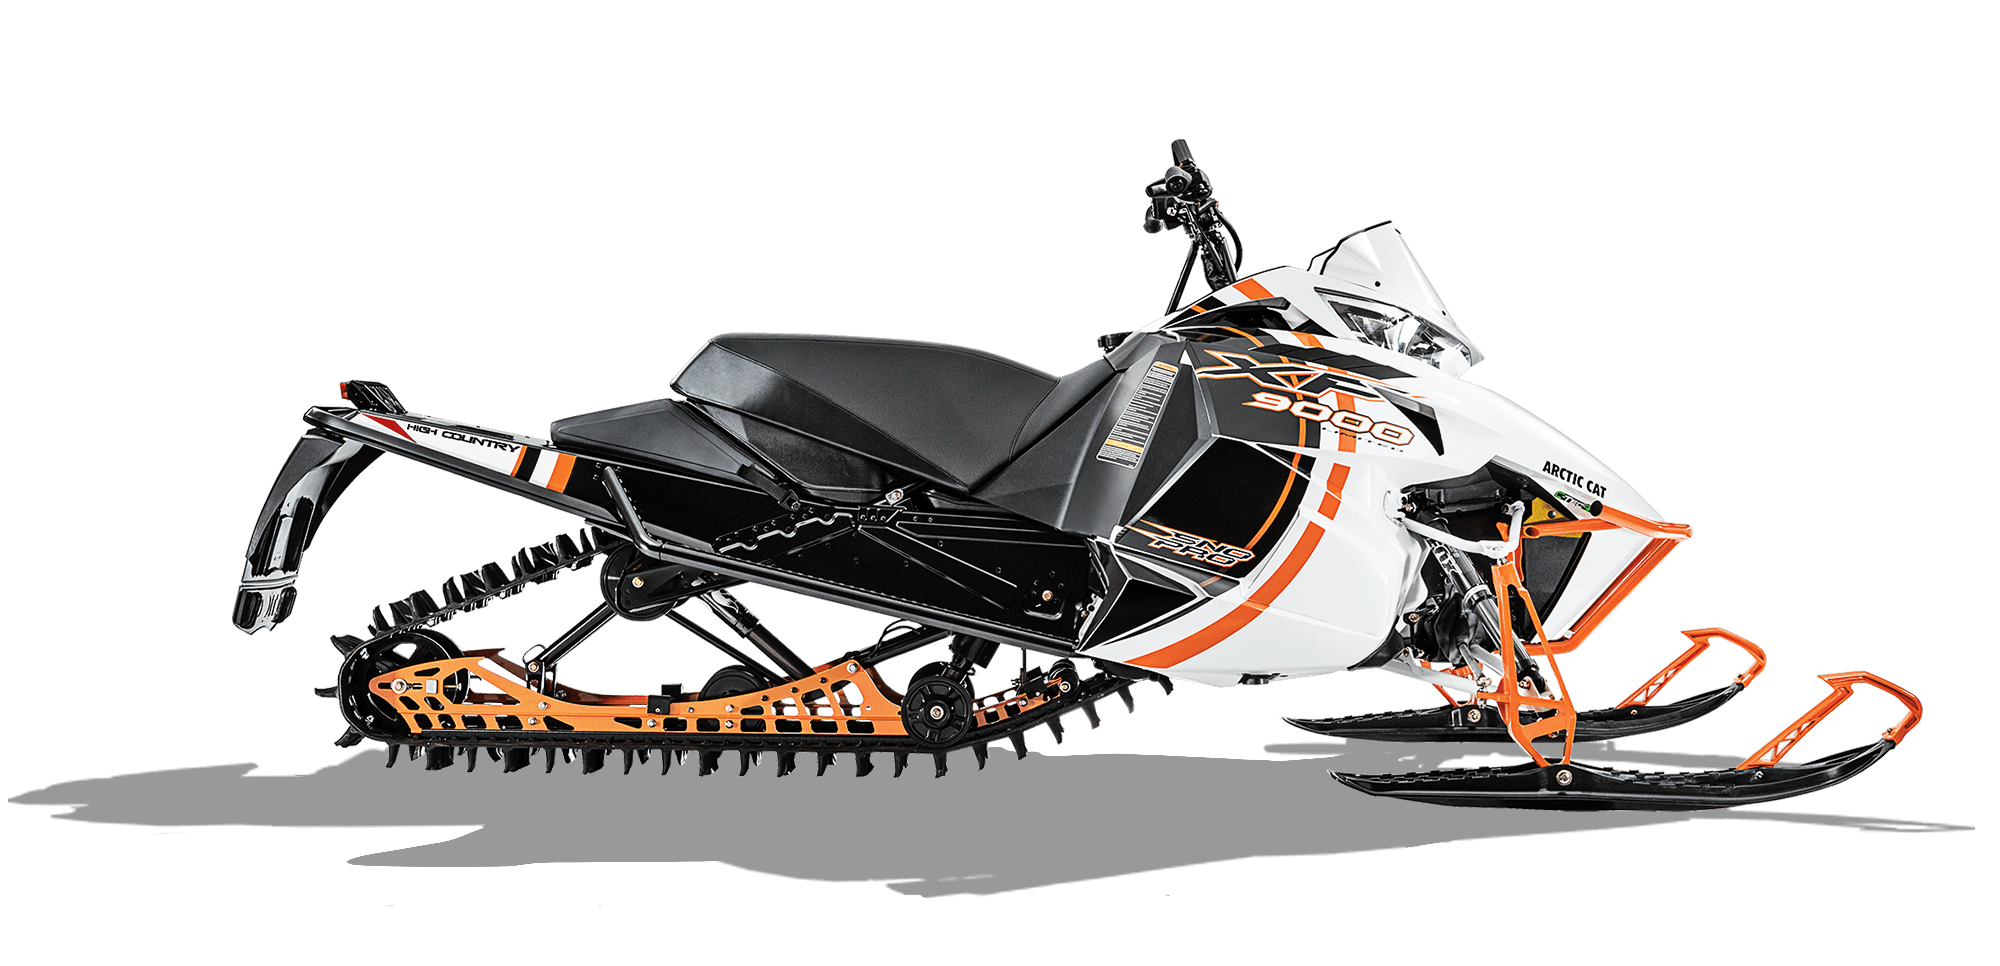 Arctic Cat XF 9000 High Country 1056cc photo - 6